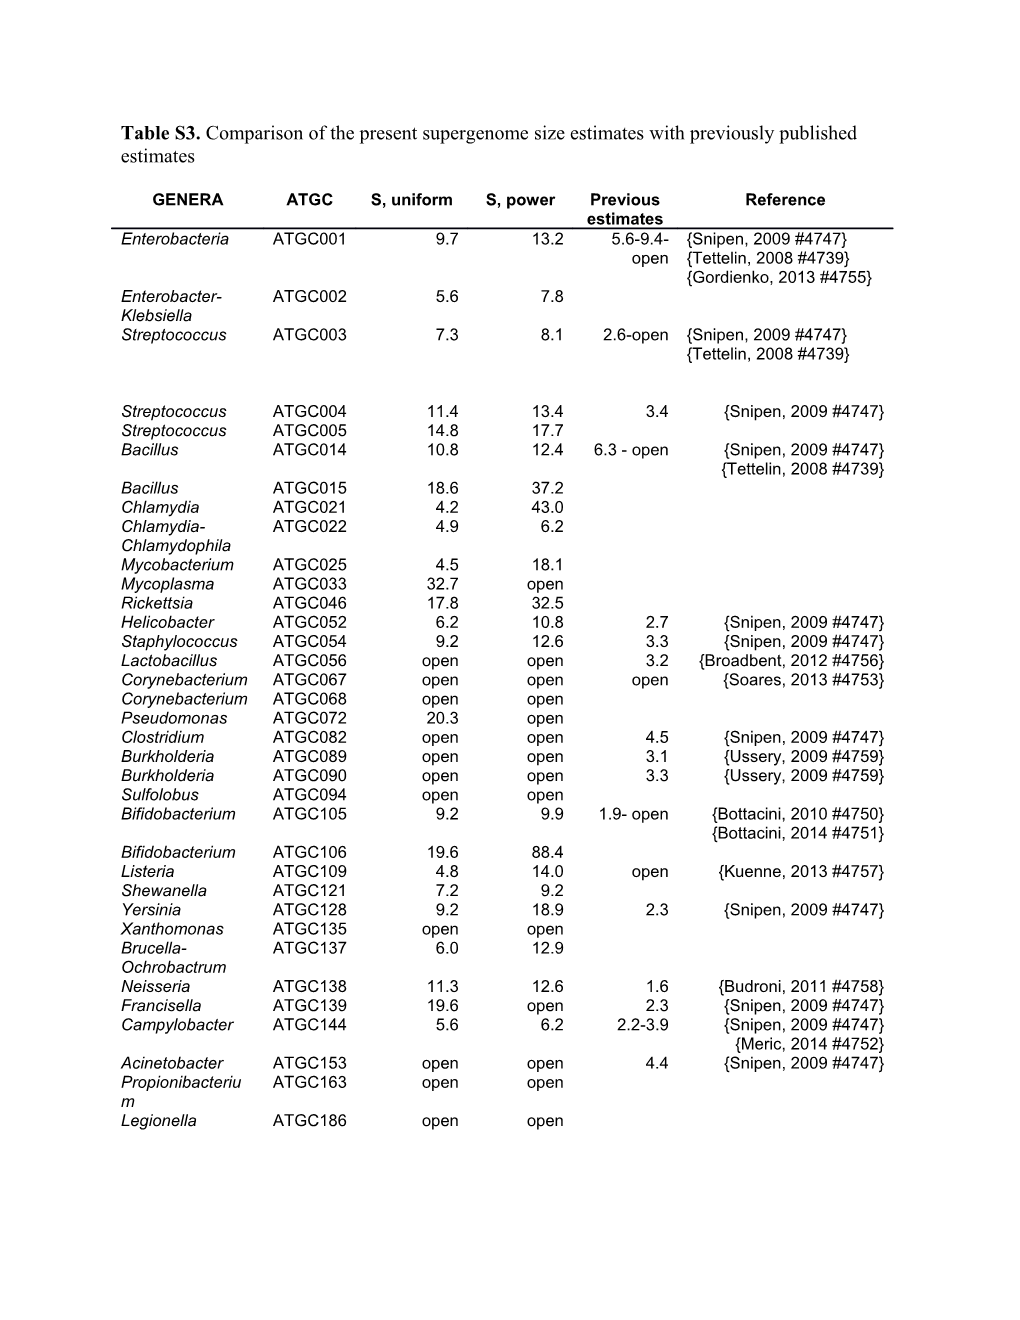 Table S3. Comparison of the Present Supergenome Size Estimates with Previously Published